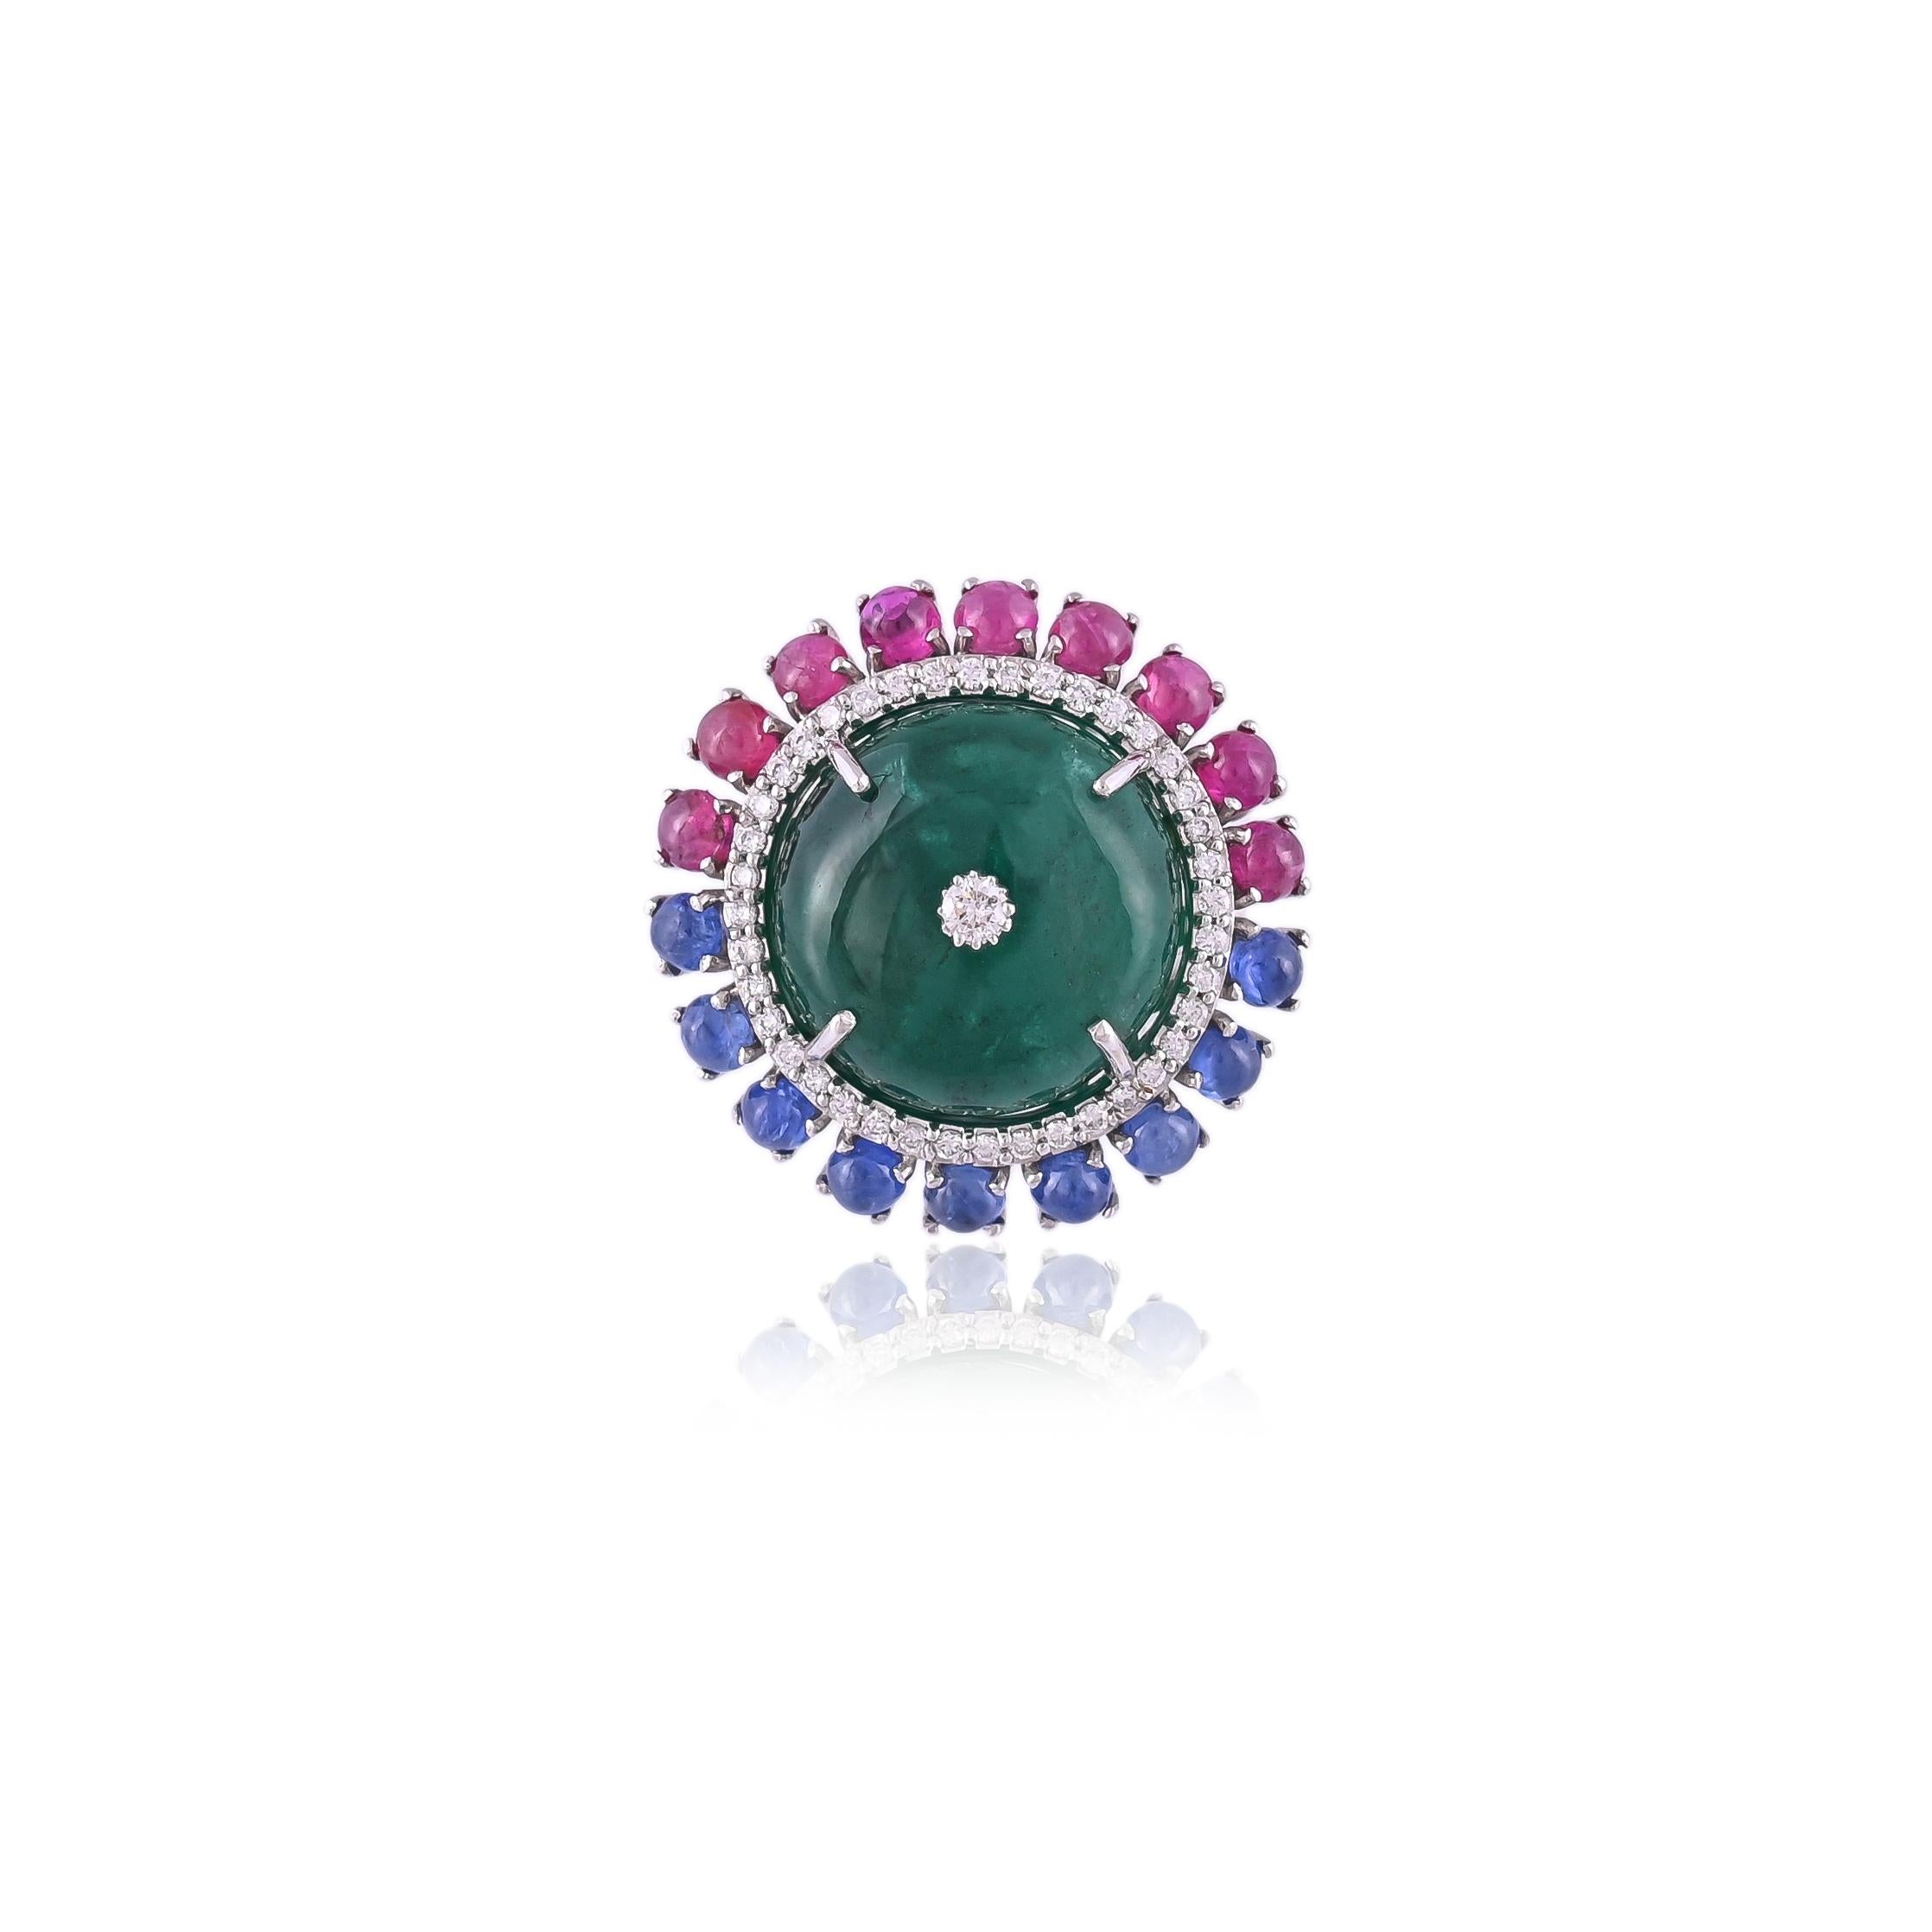 A very beautiful and one of a kind, Emerald, Blue Sapphire, Ruby Cocktail Ring set in 18K Gold & Diamonds. The Emerald is of Zambian origin, completely natural without any treatment and weighs 23.58 carats. The Blue Sapphire is of Burmese origin,